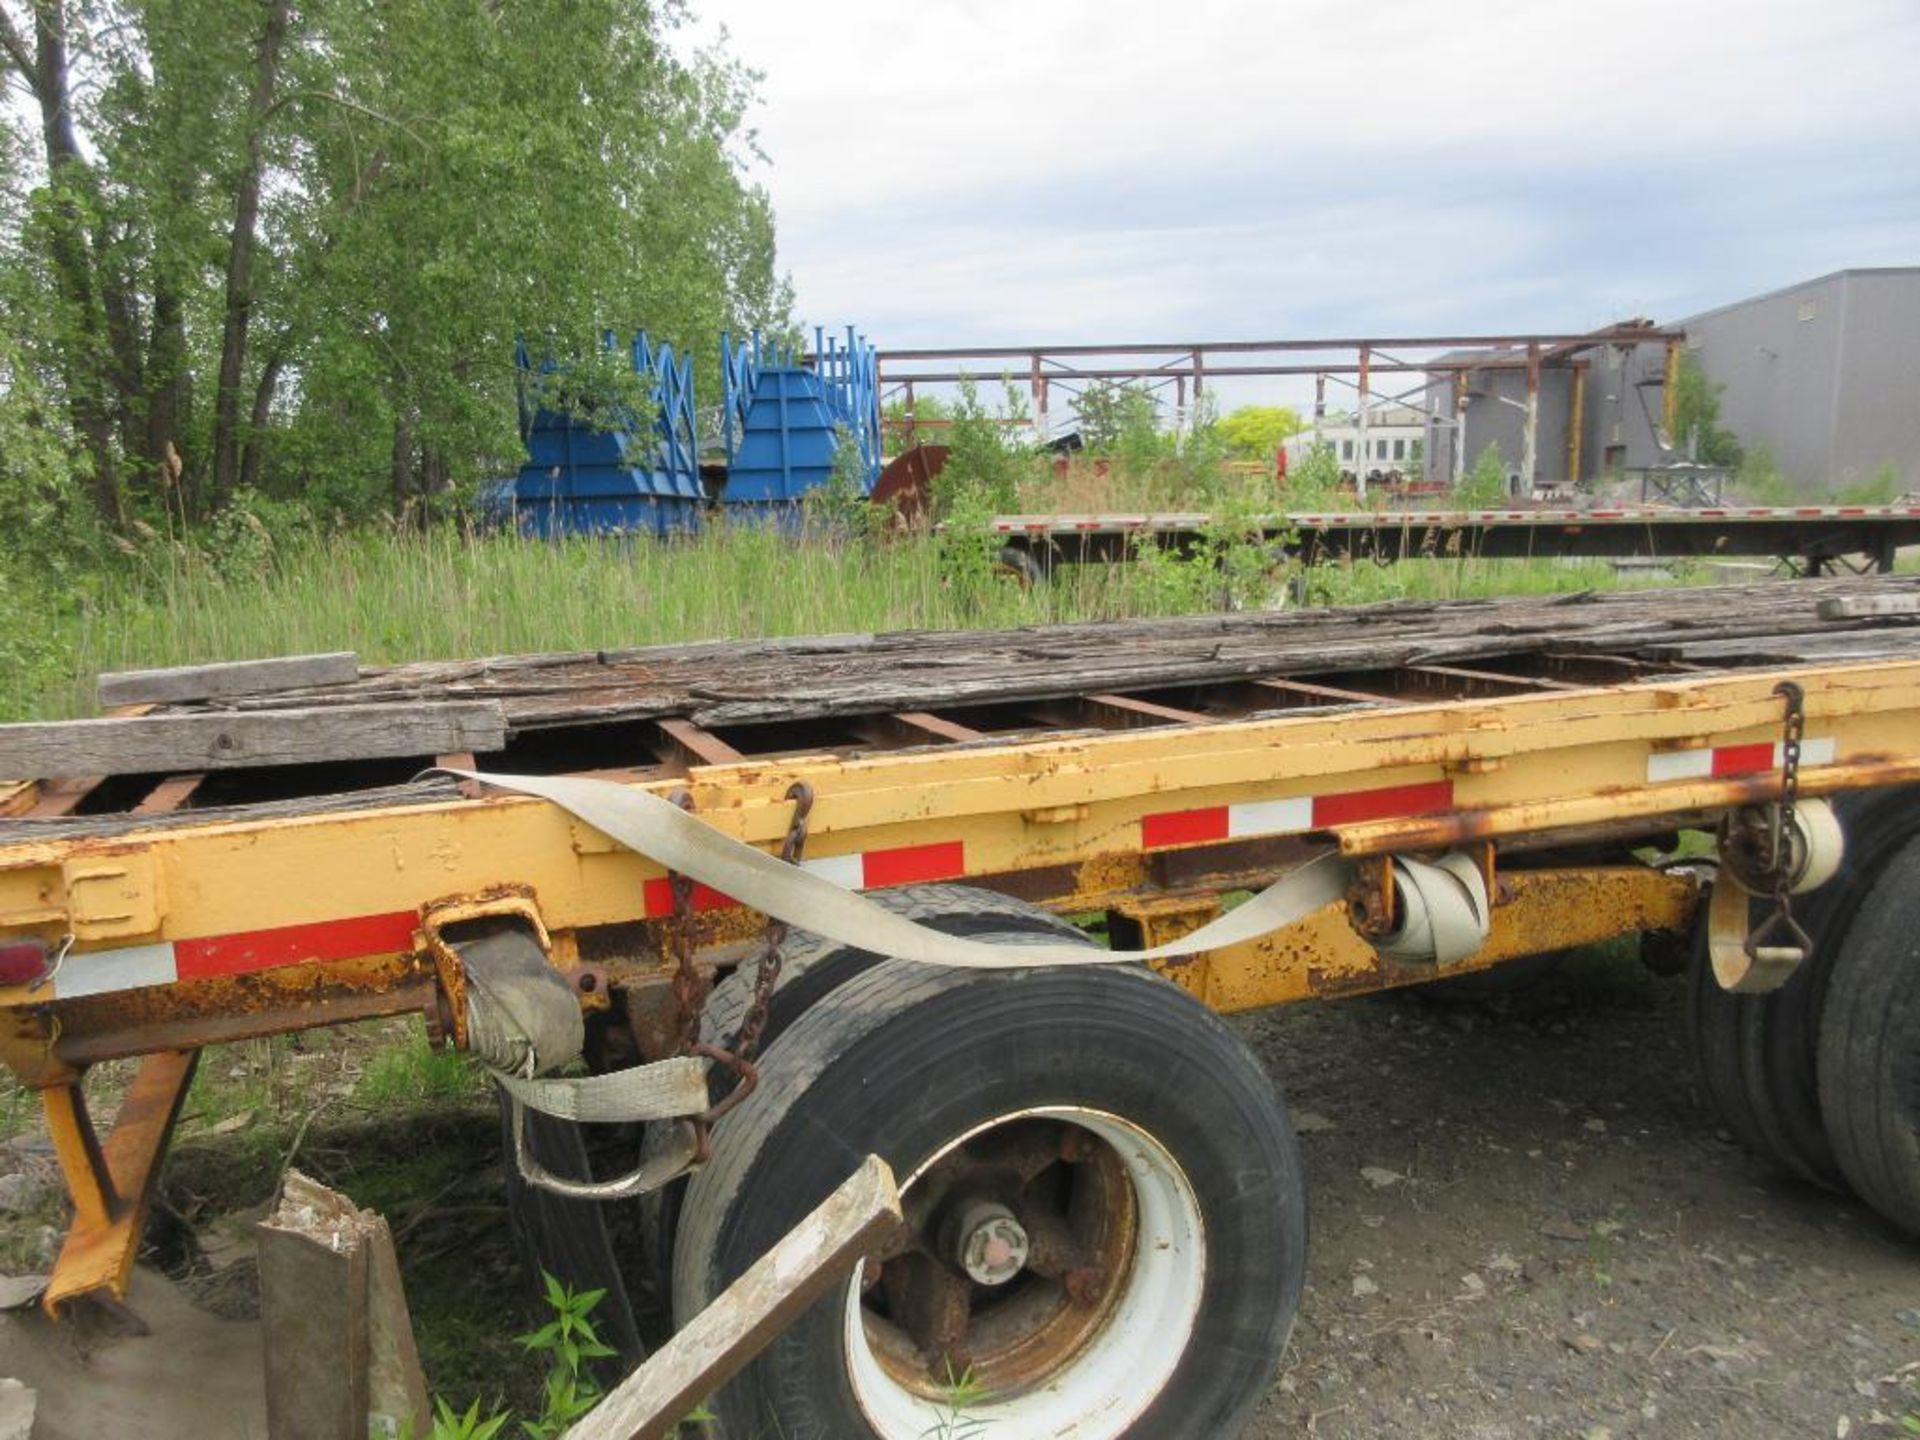 1967 CANCAR, 44' TRAILER, VIN 671026 (NORTH WEST YARD) *AUCTIONEER'S NOTE: YARD TRAILER, NO OWNERSHI - Image 4 of 10